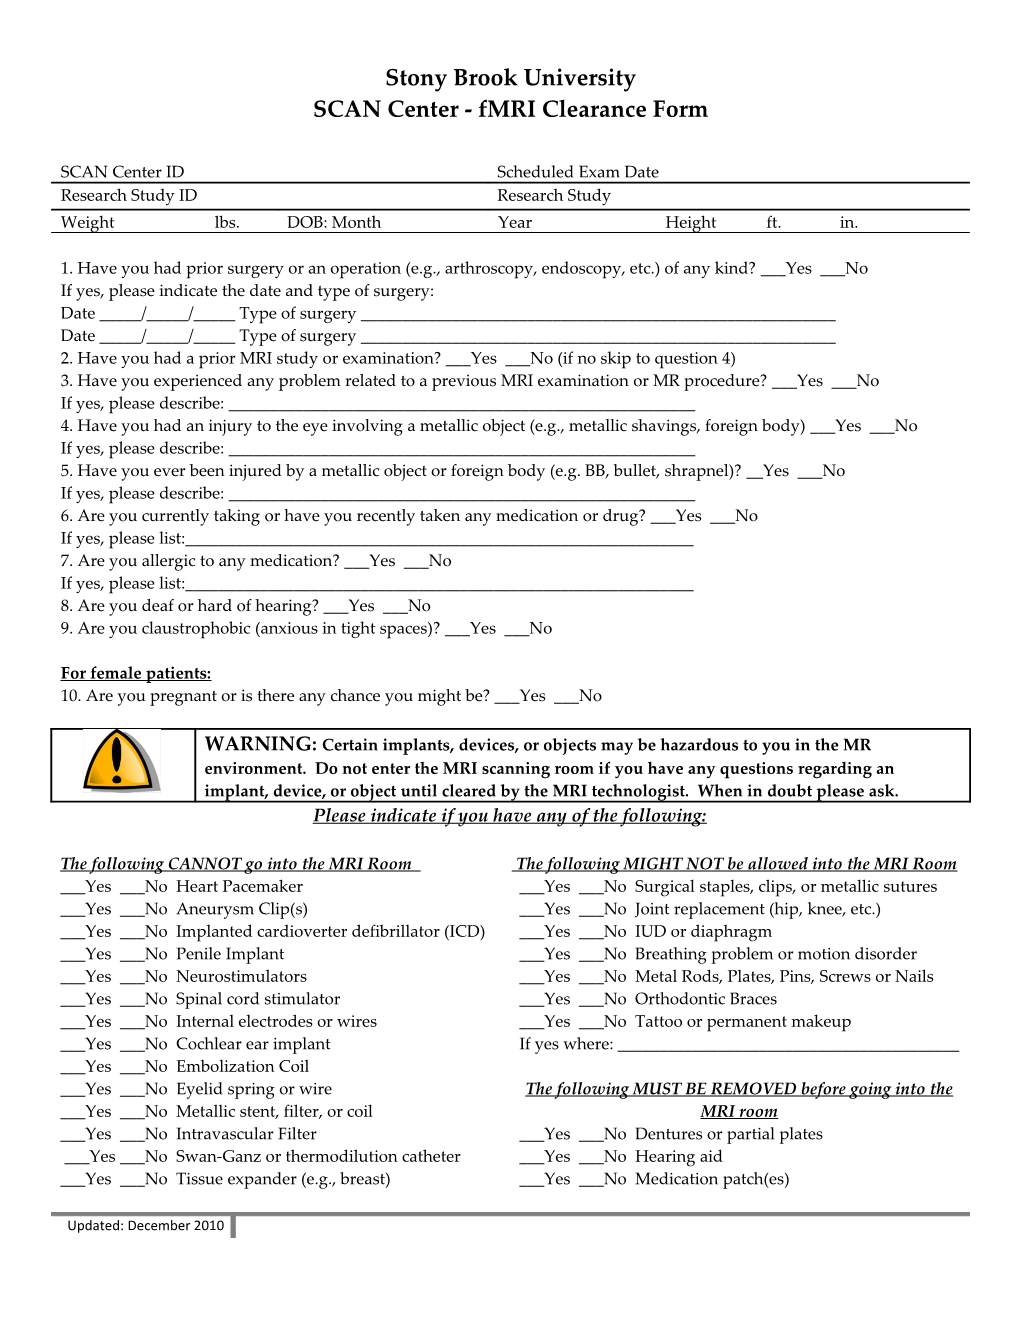 SCAN Center - Fmri Clearance Form